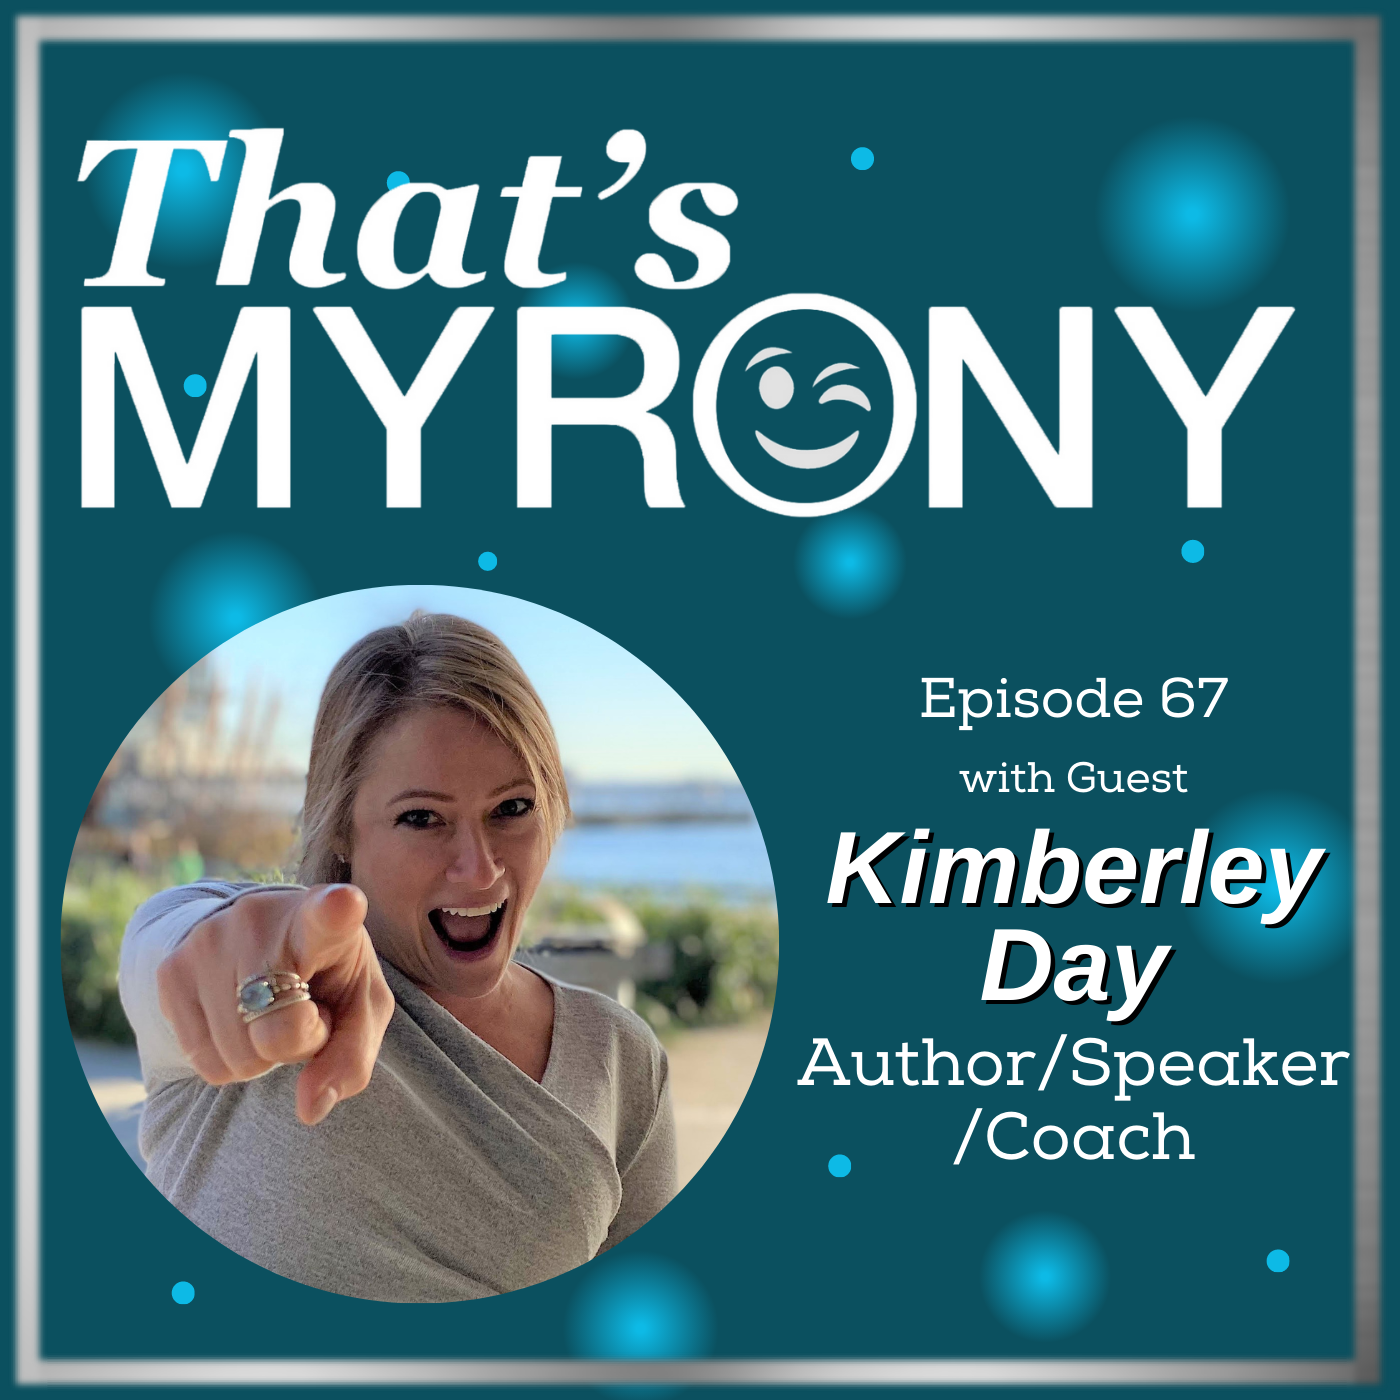 How Cancer Became the Myronic Catalyst for Transformation with Kimberley Day